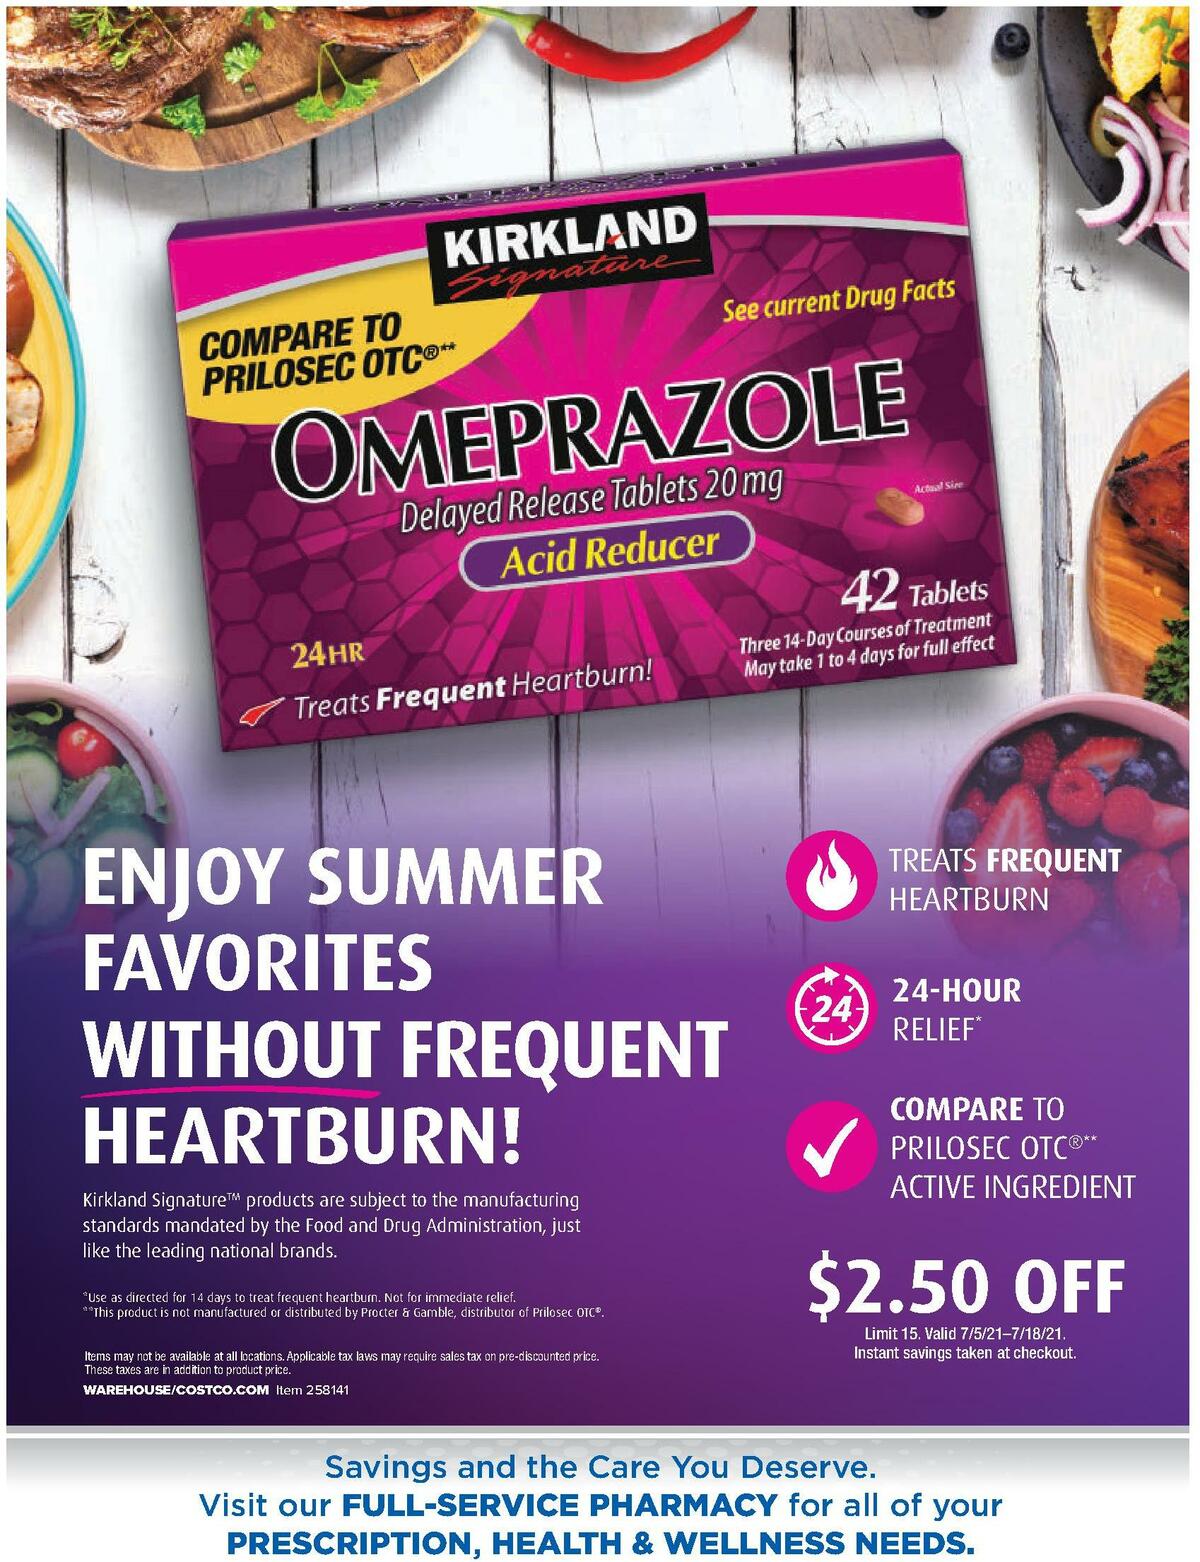 Costco Connection July Weekly Ad from July 1